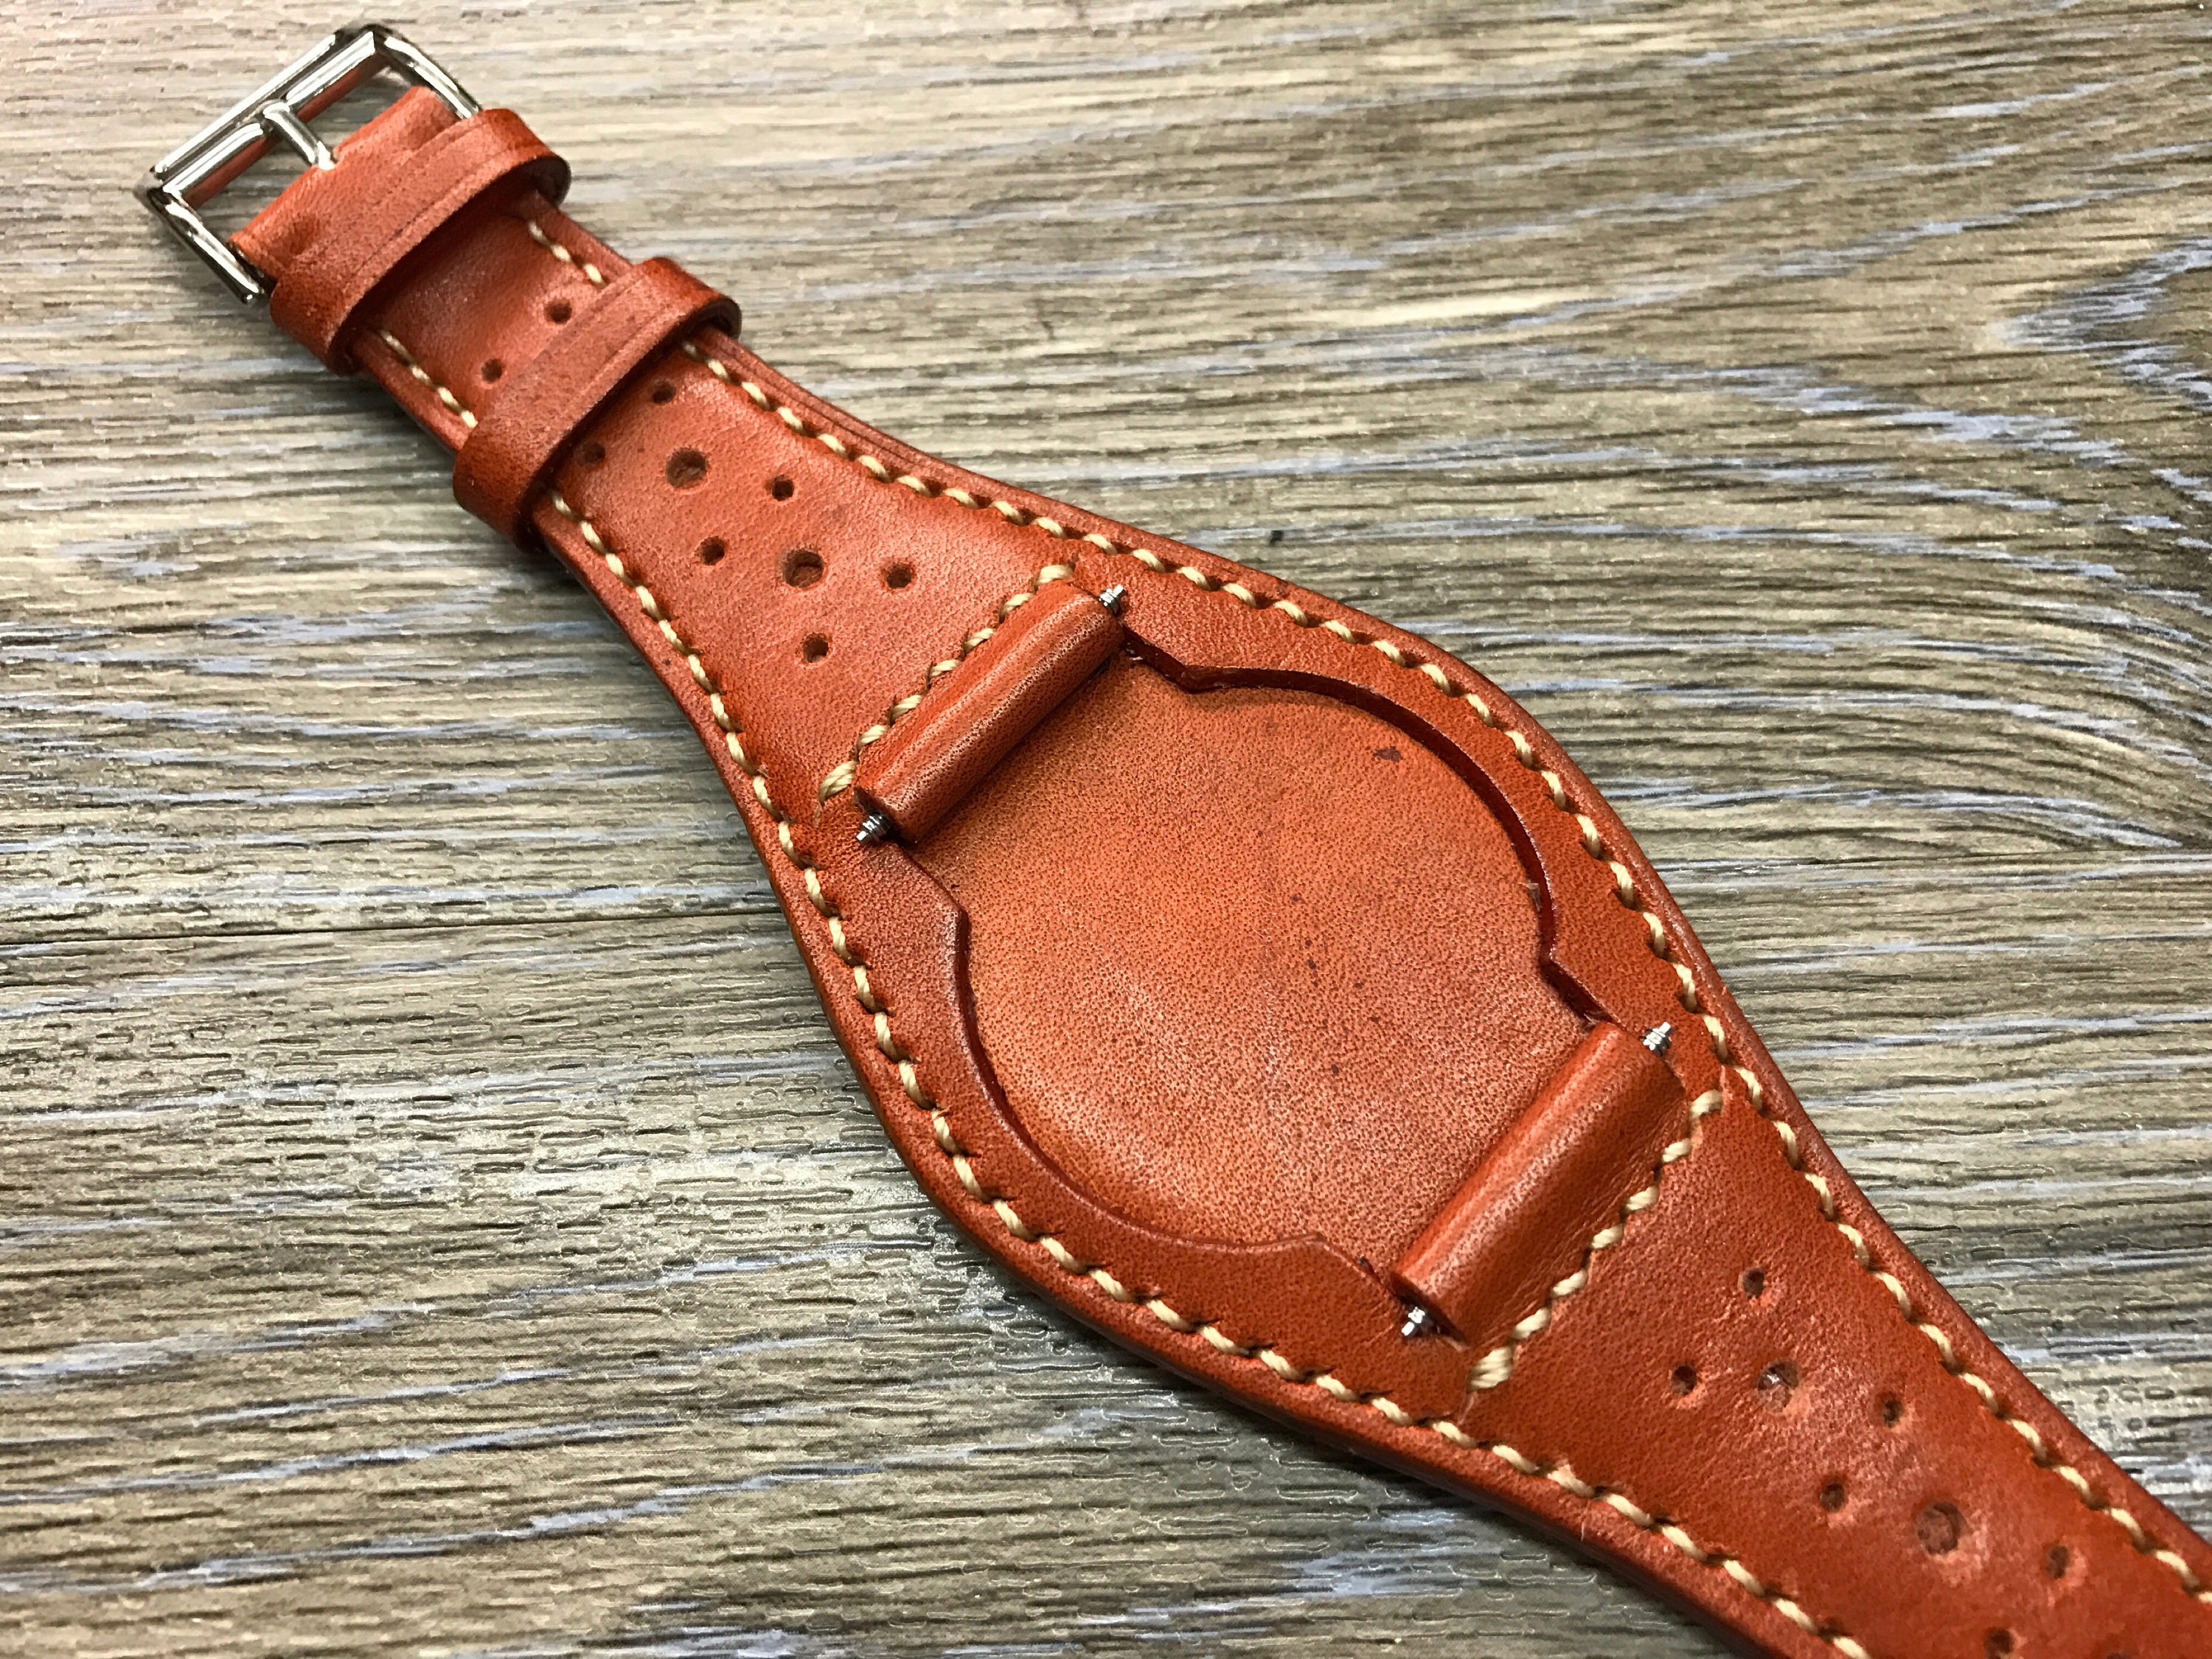 Full Bund Strap Handmade Leather Cuff Watch Band Leather - Etsy Hong Kong